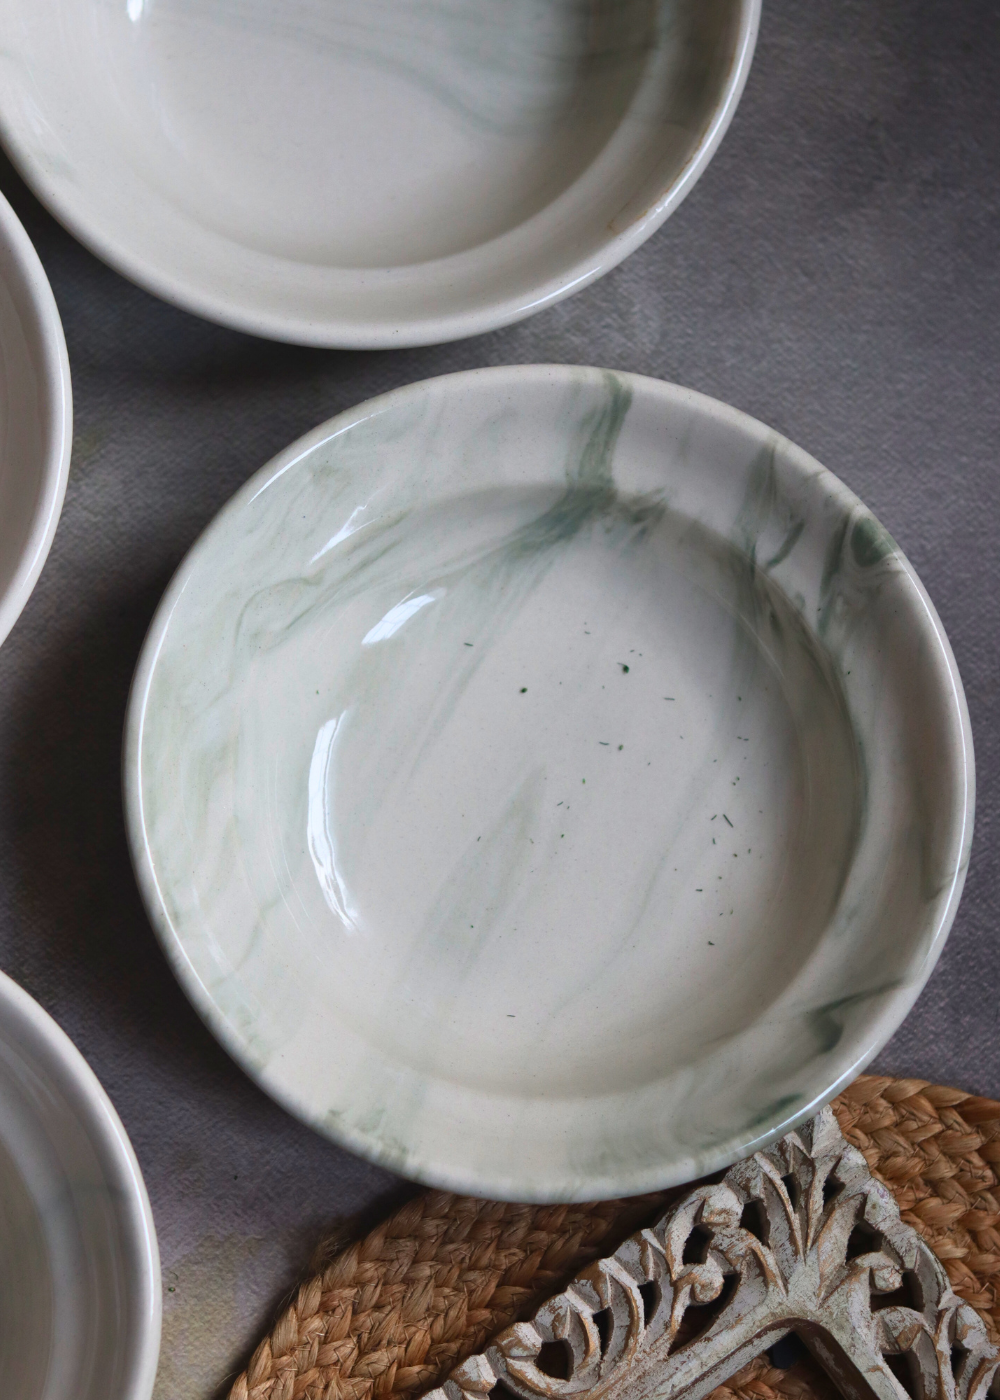 Green marble pasta plates 